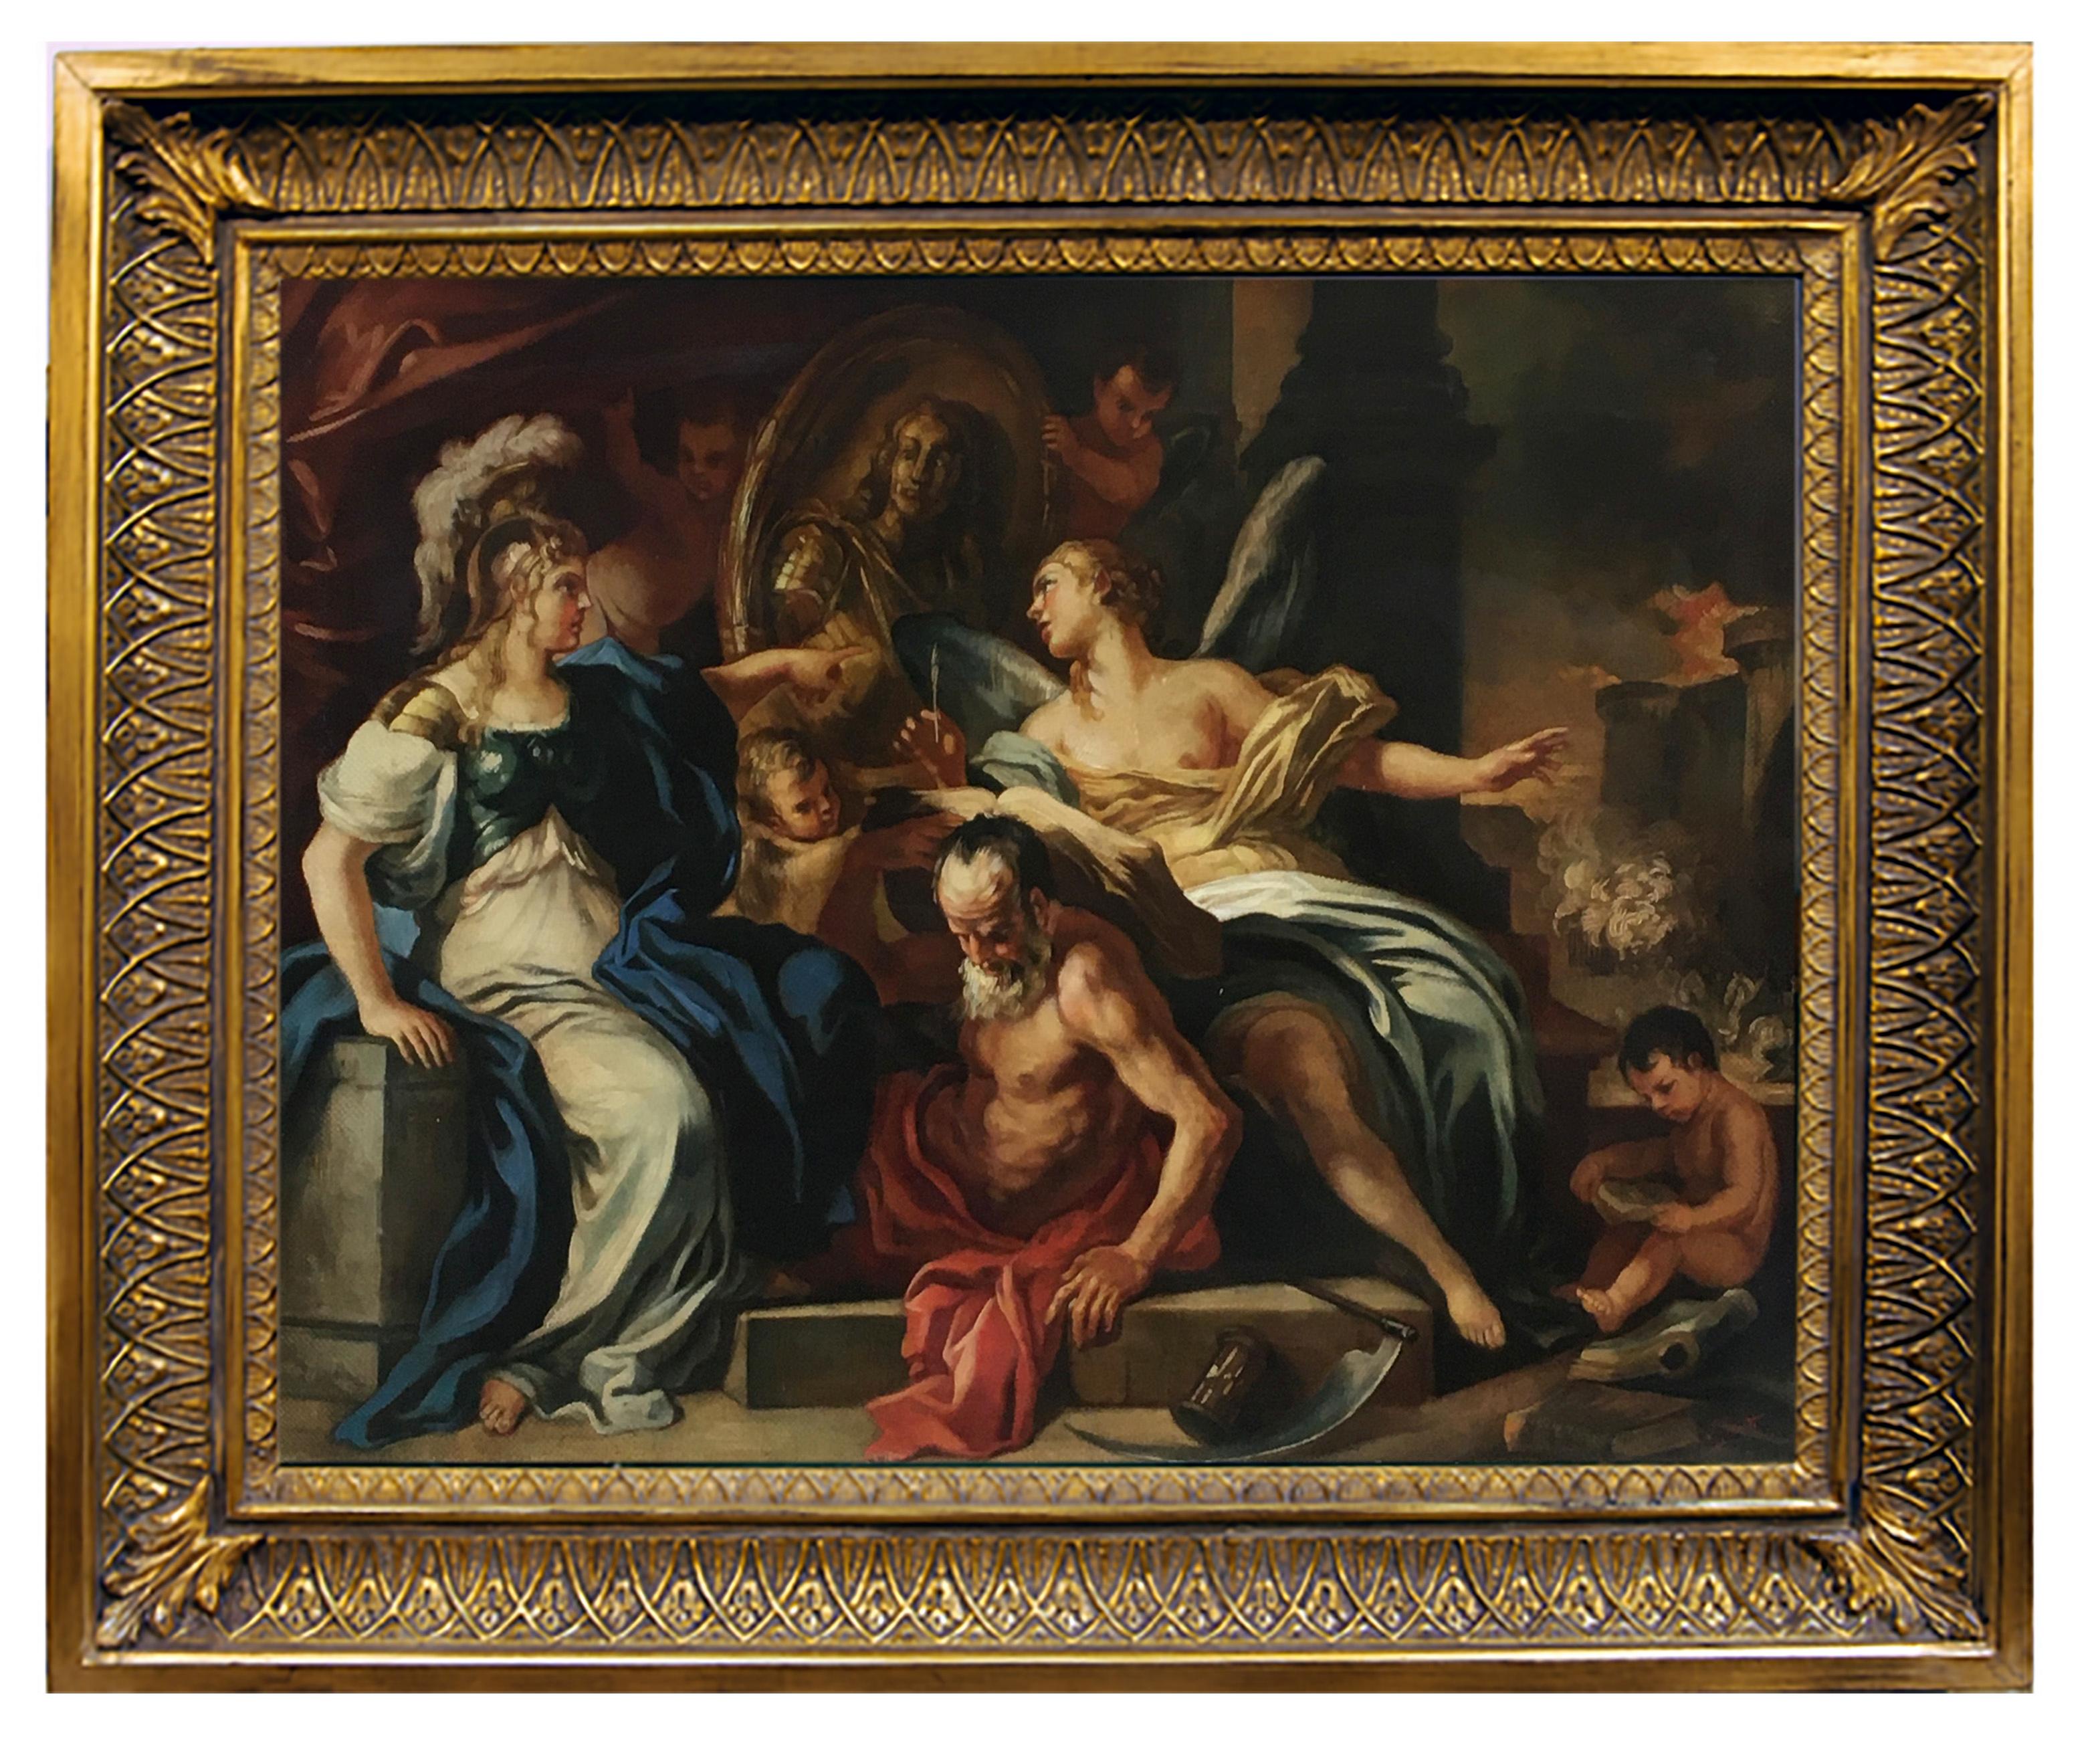 Allegory - Angelo Granati - Italia 2014 - Oil on canvas cm.60x80. 
This is his reinterpretation of a greatest old master painting "Minerva with Chronos and History" by Francersco Solimena.
Gold leaf gilded and laquered wooden frame available on